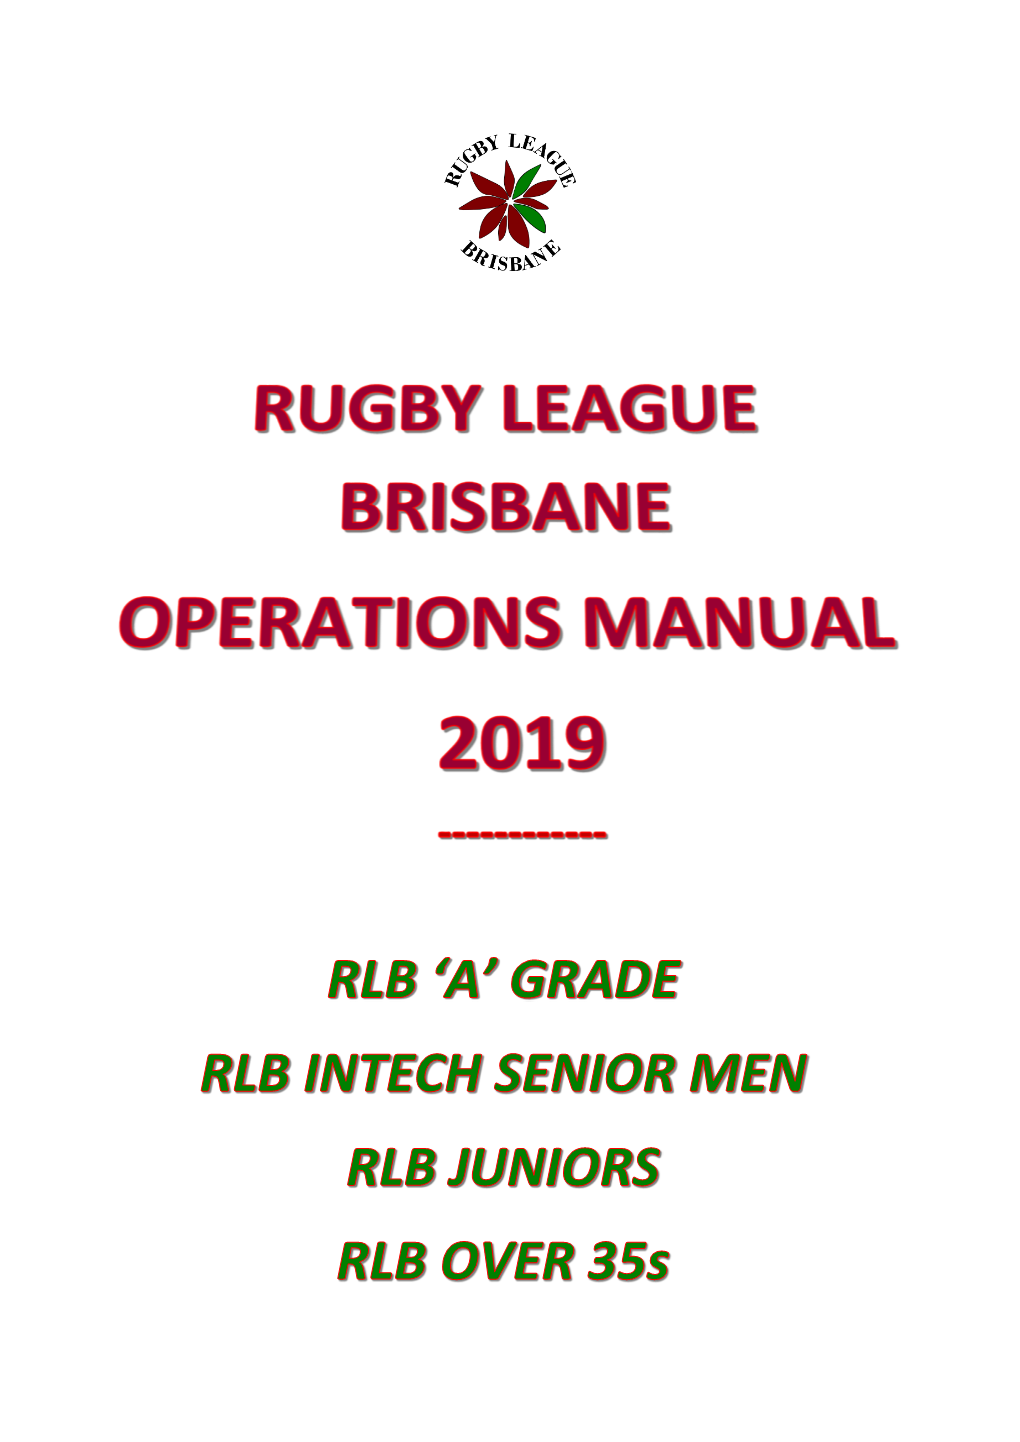 2019-Operations-Manual-For-Rugby